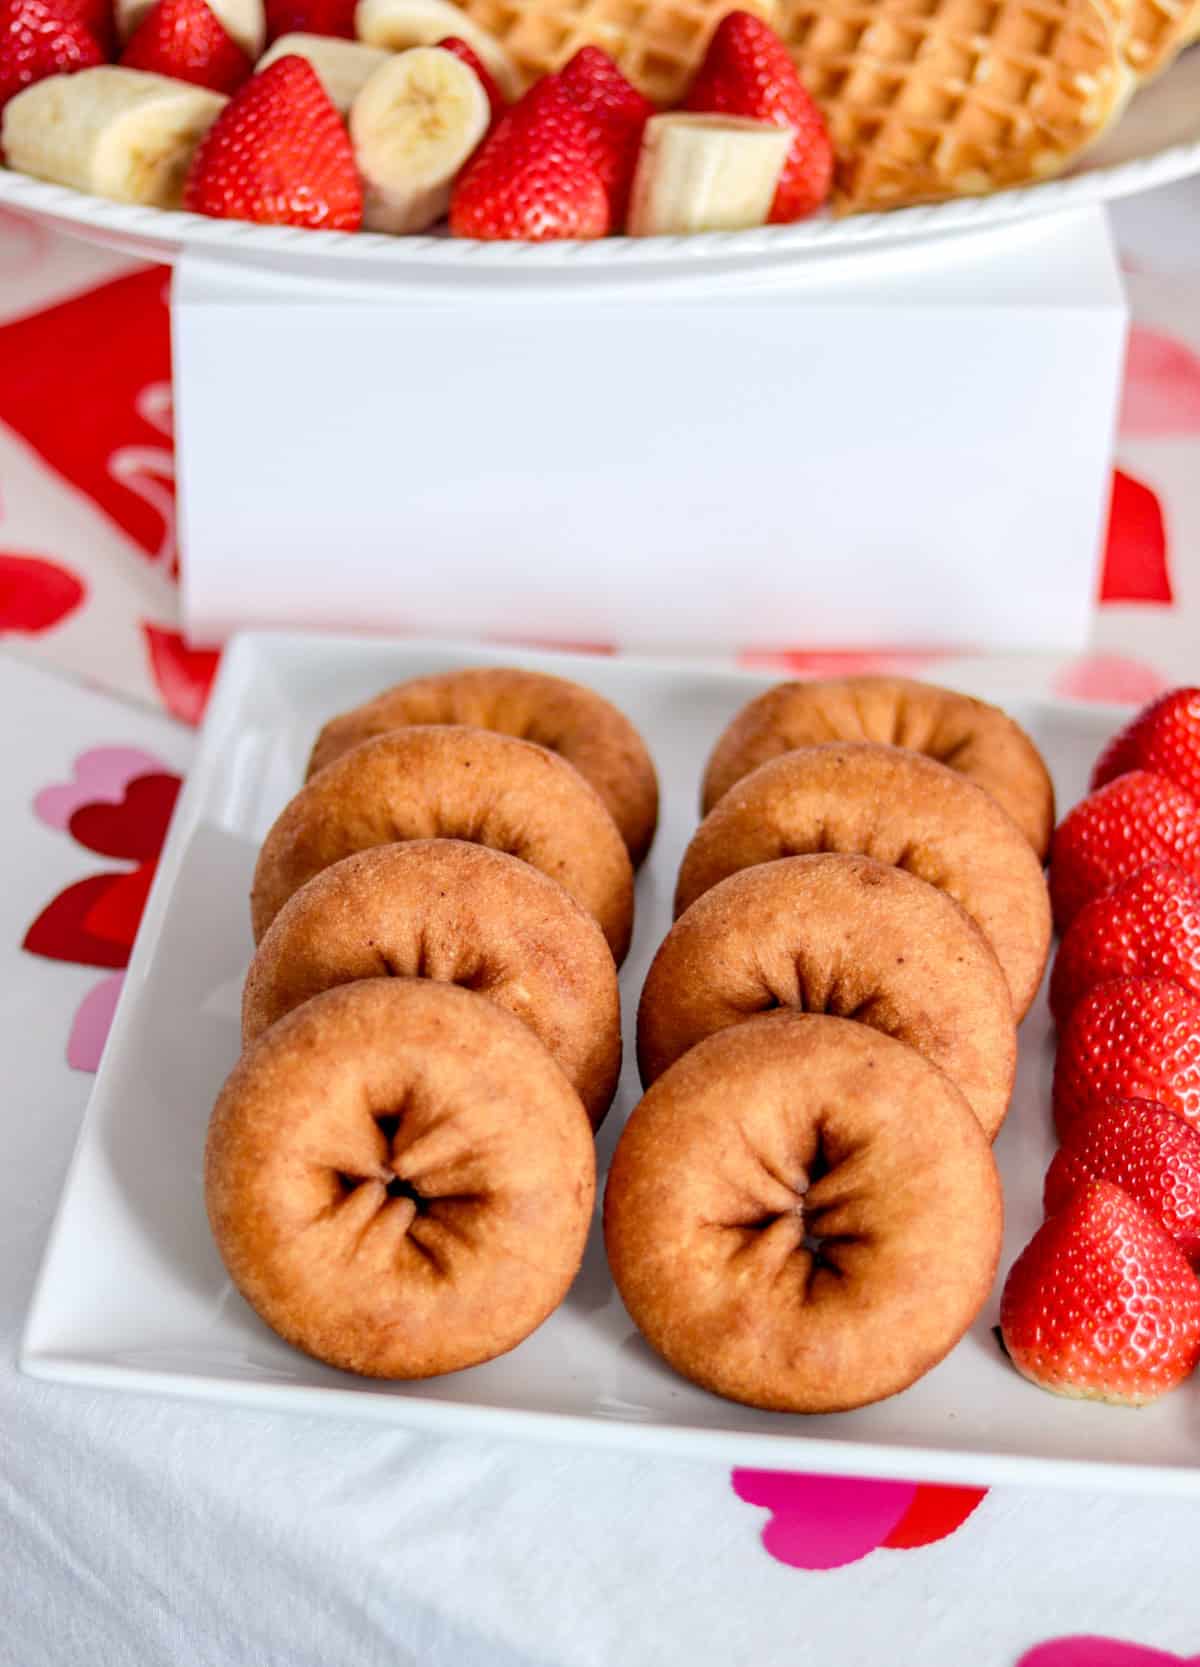 Donuts and strawberries on plate.